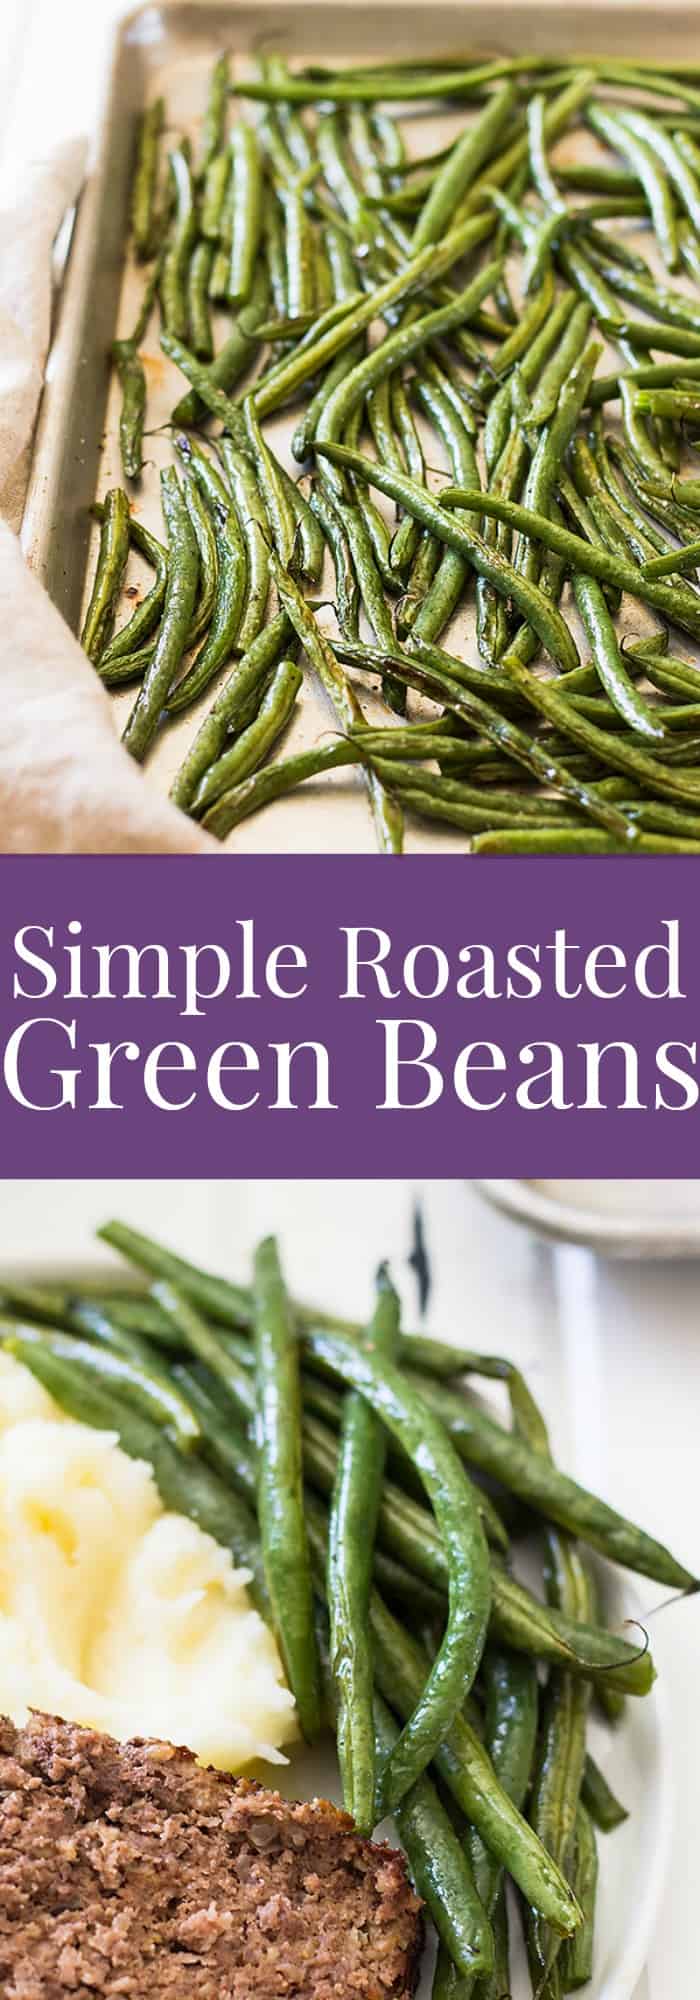 These Simple Roasted Green Beans are a really quick side dish that will add nutrition to any meal! | www.countrysidecravings.com